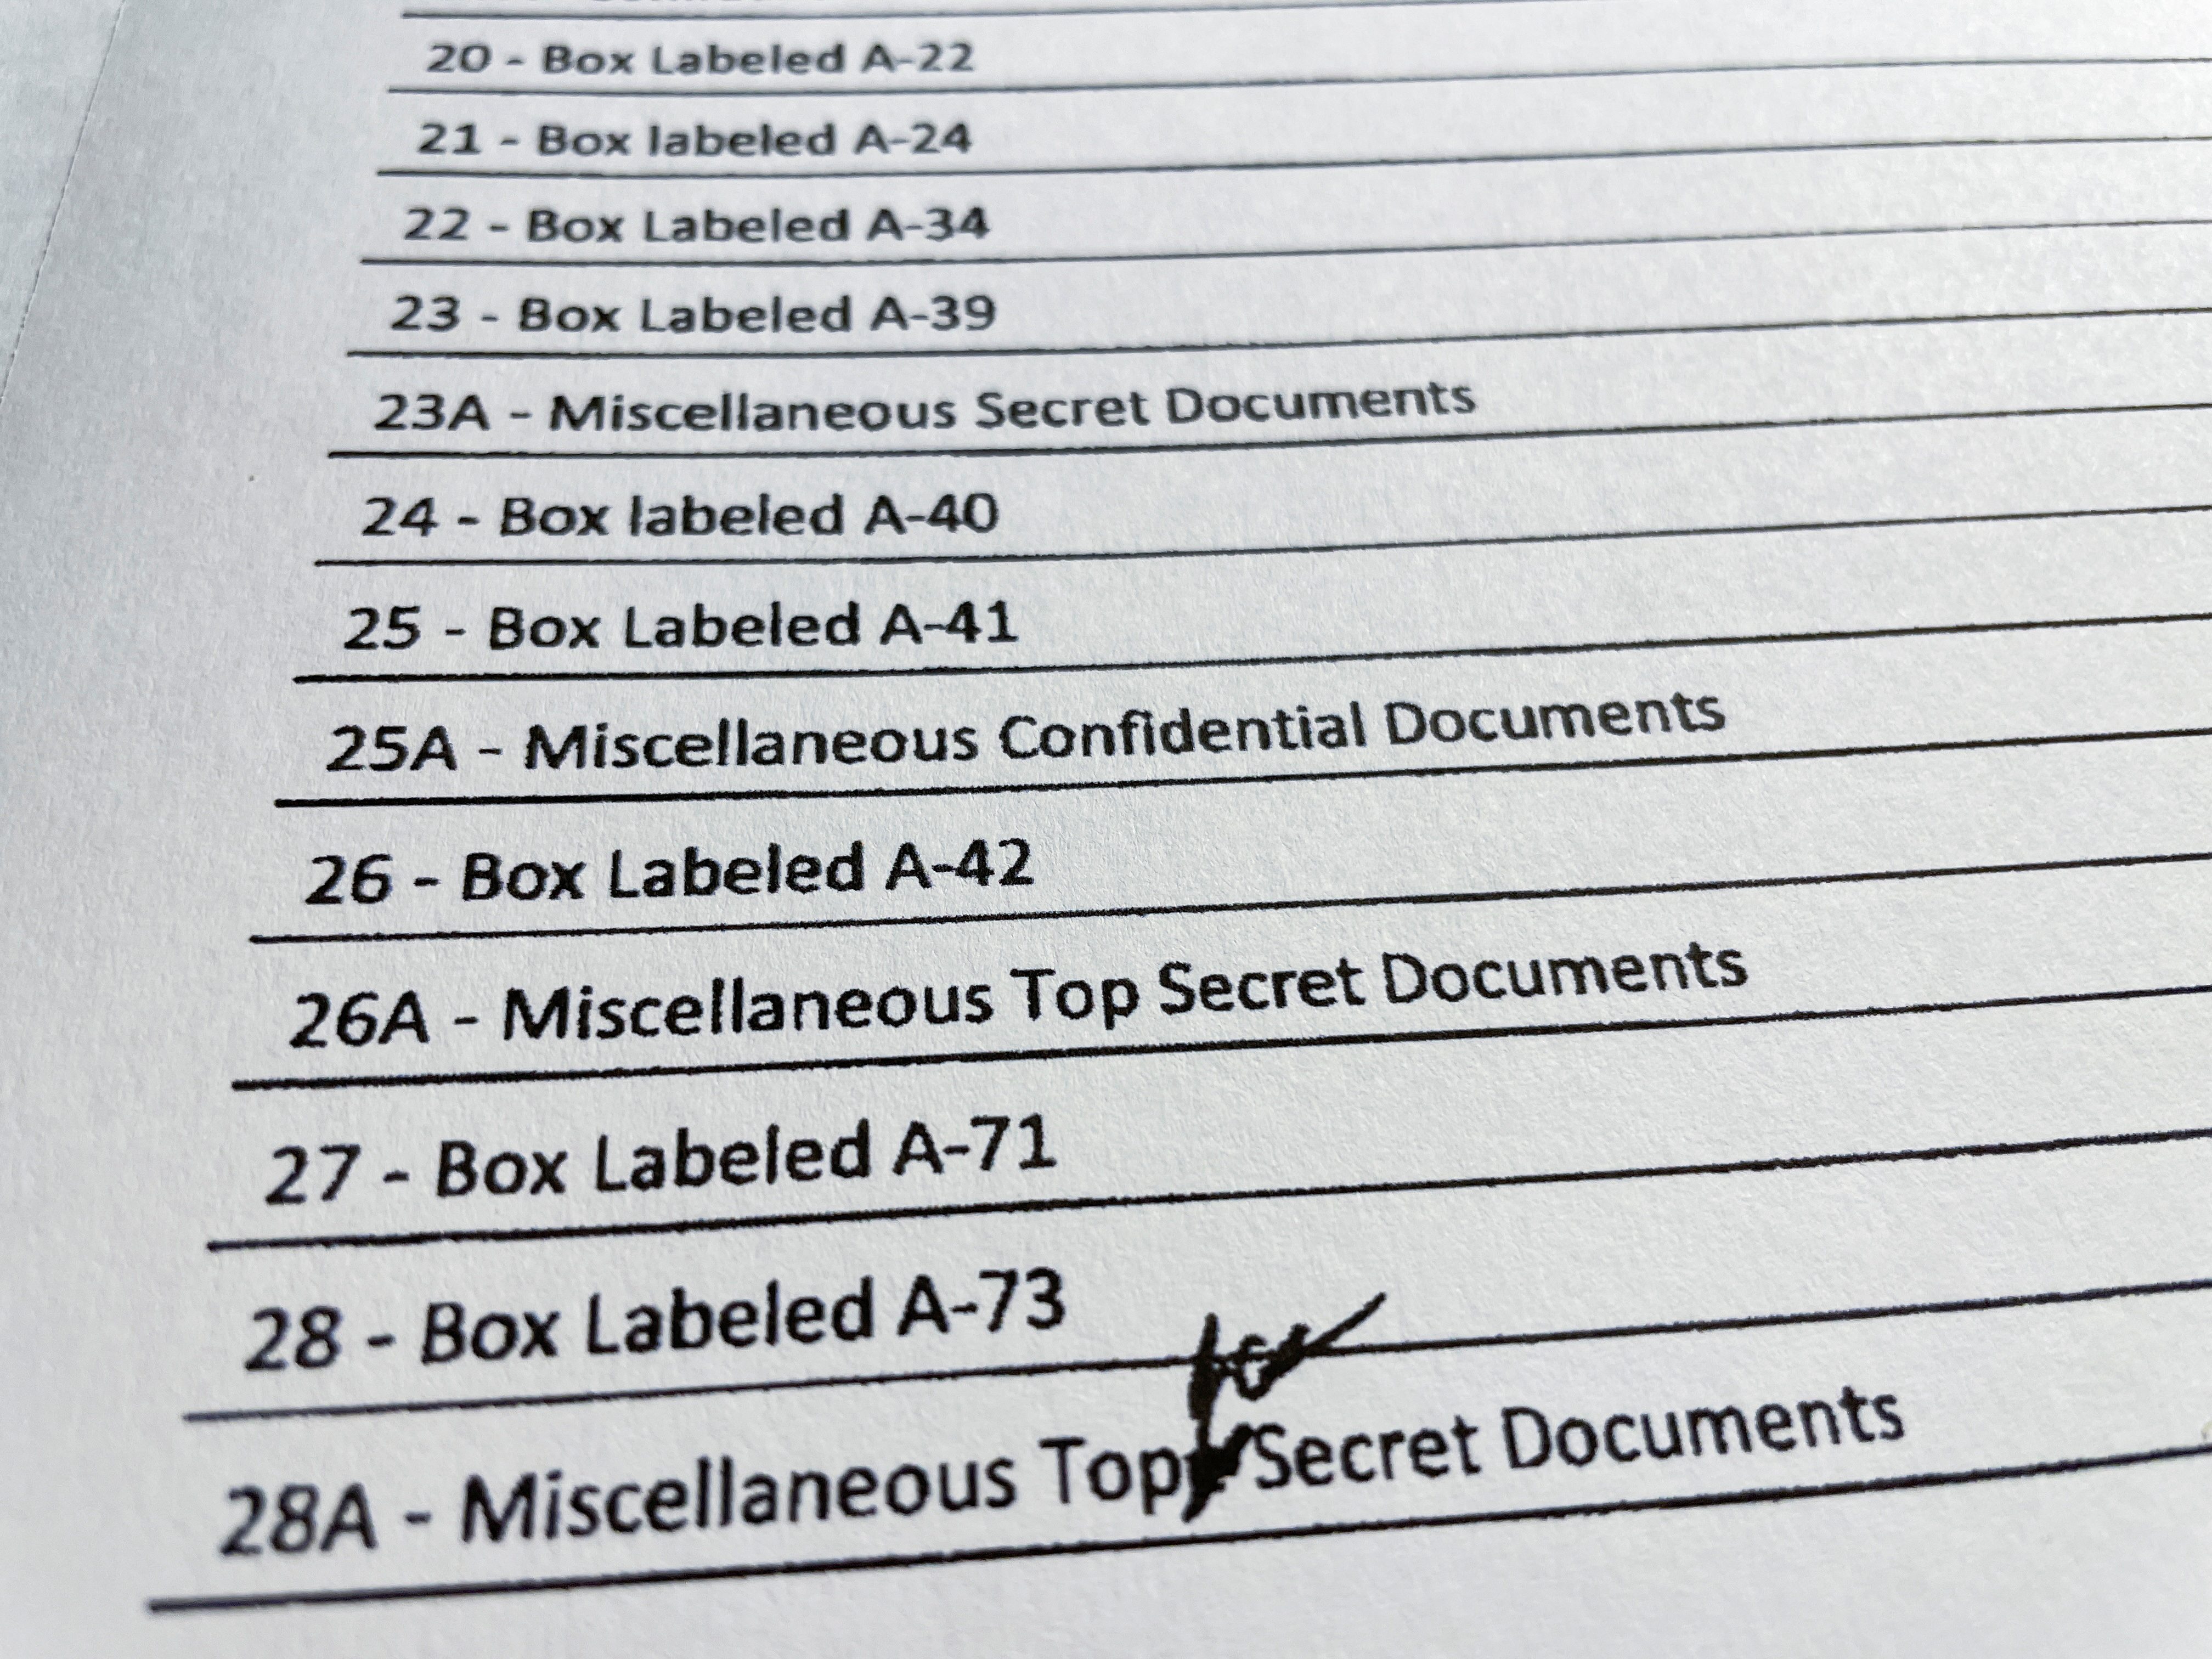 Itemized list of property seized the FBI during search of former U.S. President Donald Trump's Mar-a-Lago estate is seen after being released by U.S. federal court in Florida